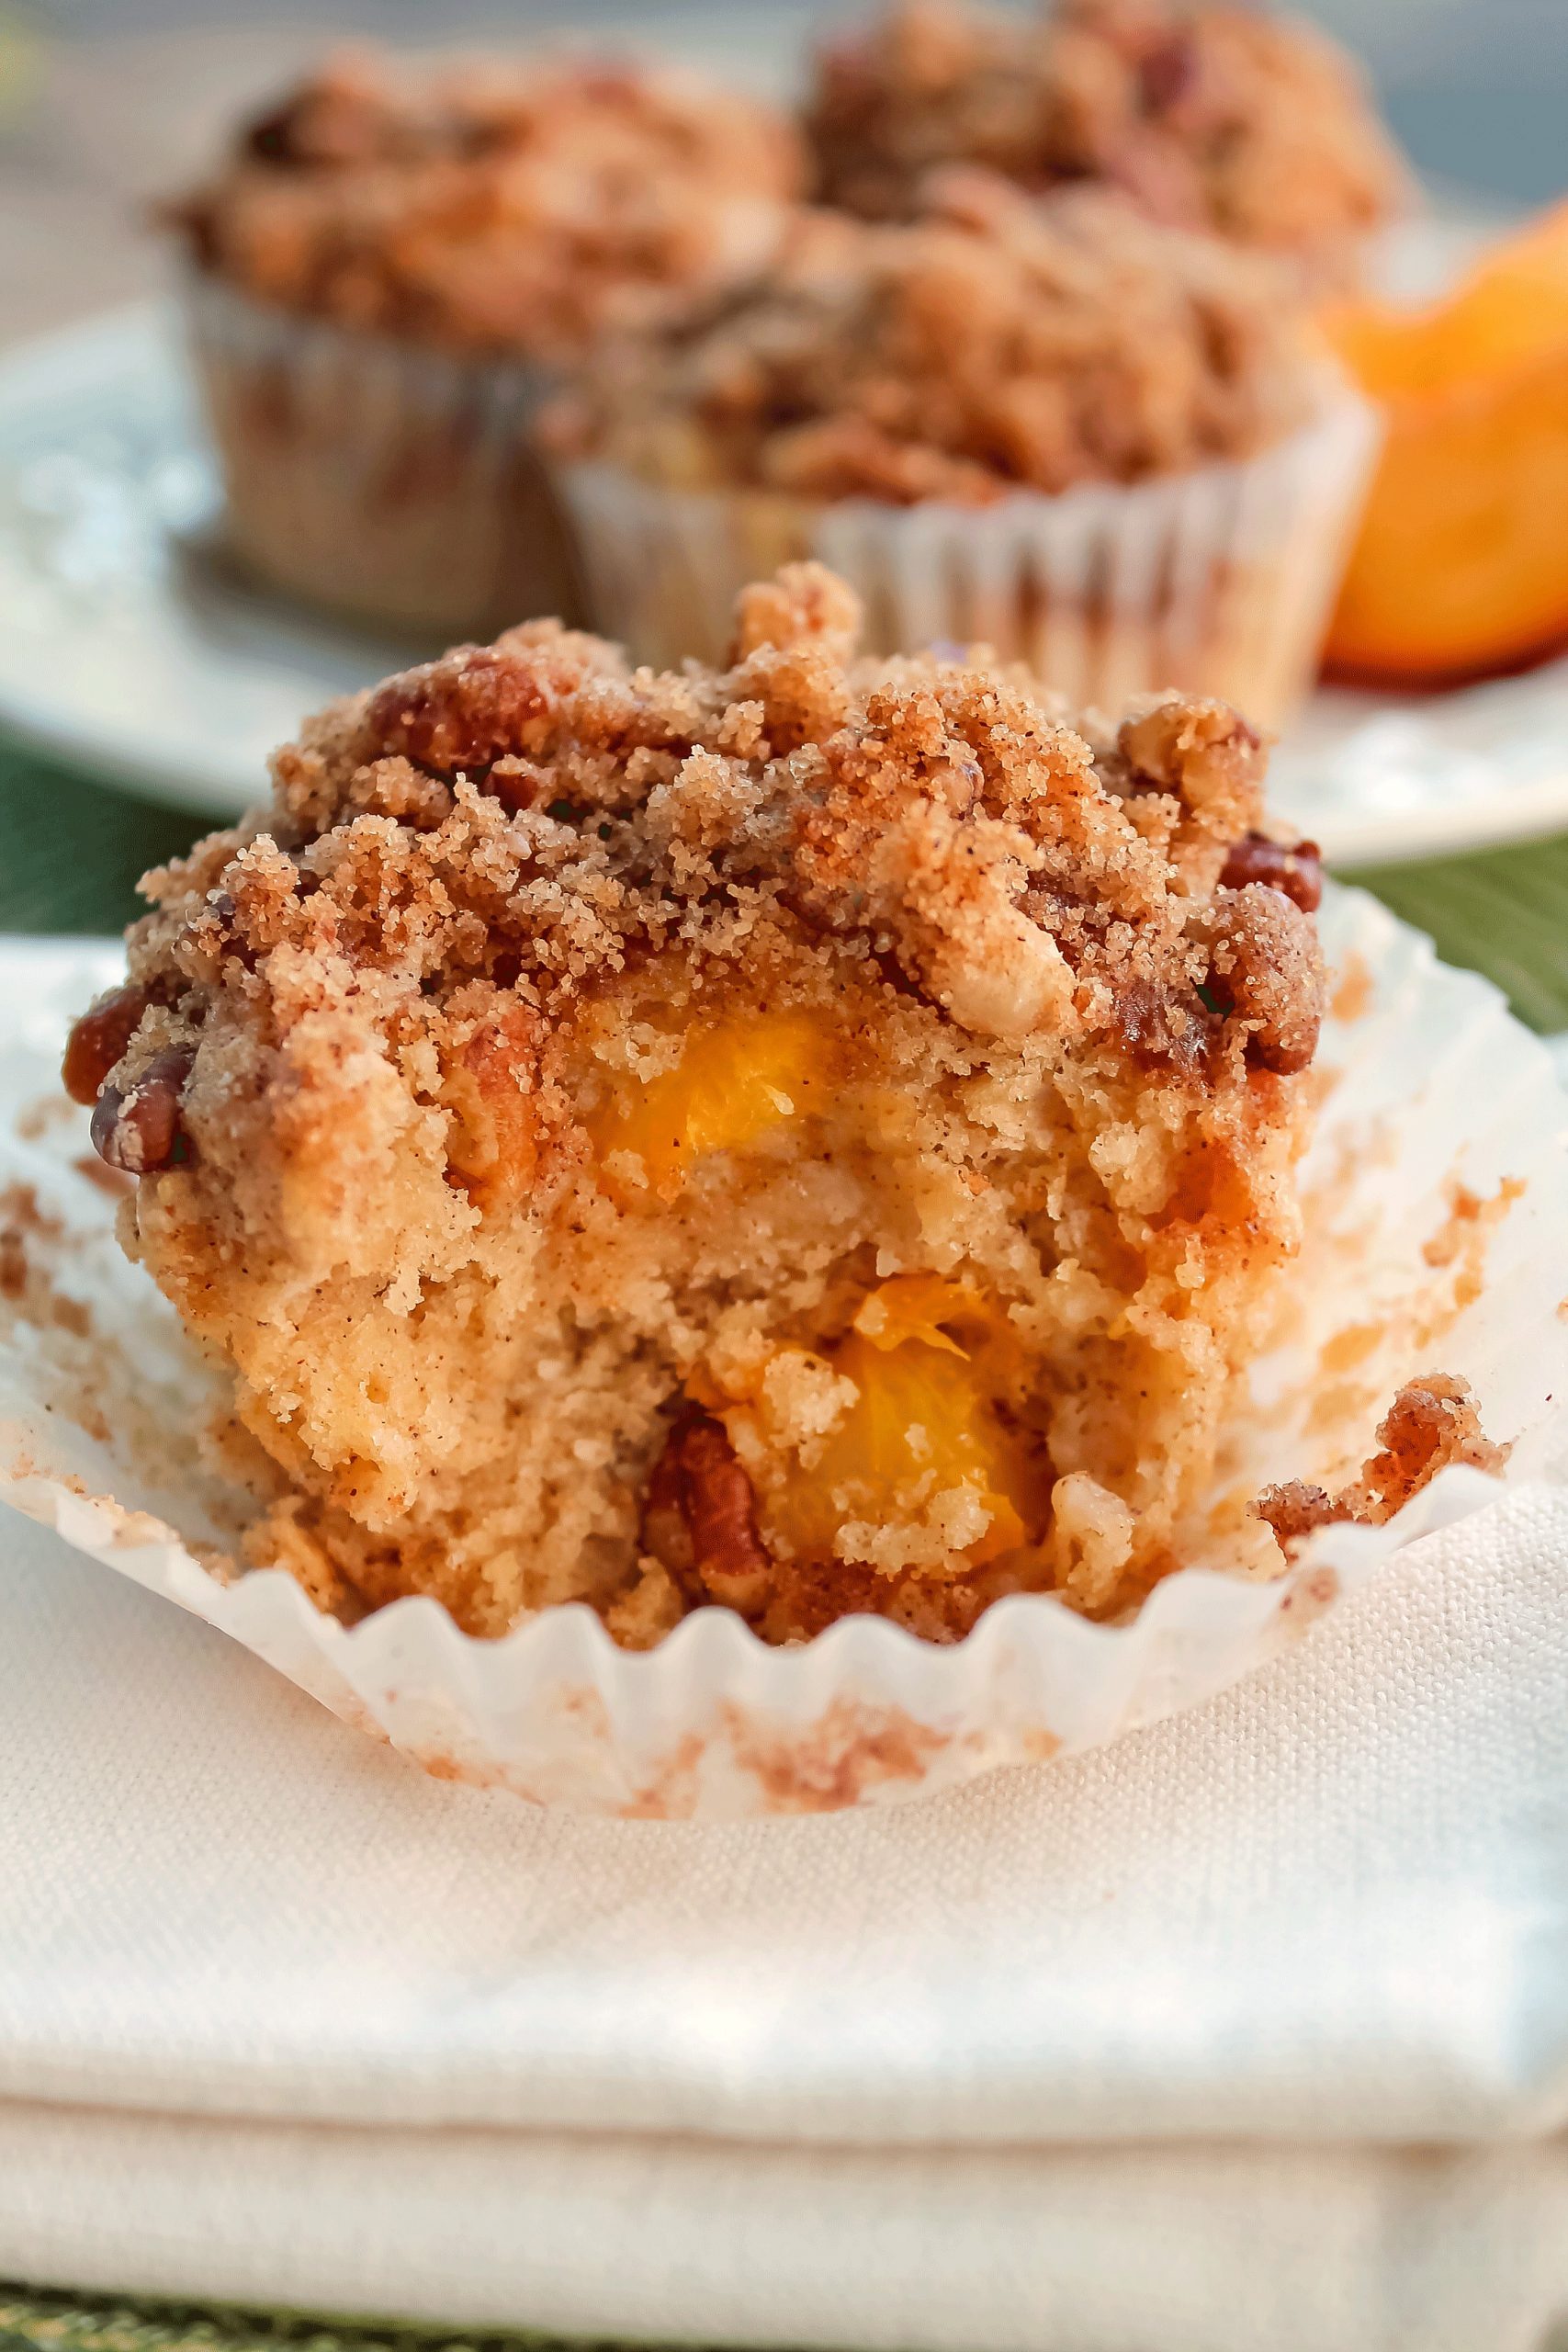 An open half muffin filled with cubed peaches, topped with crumb topping 